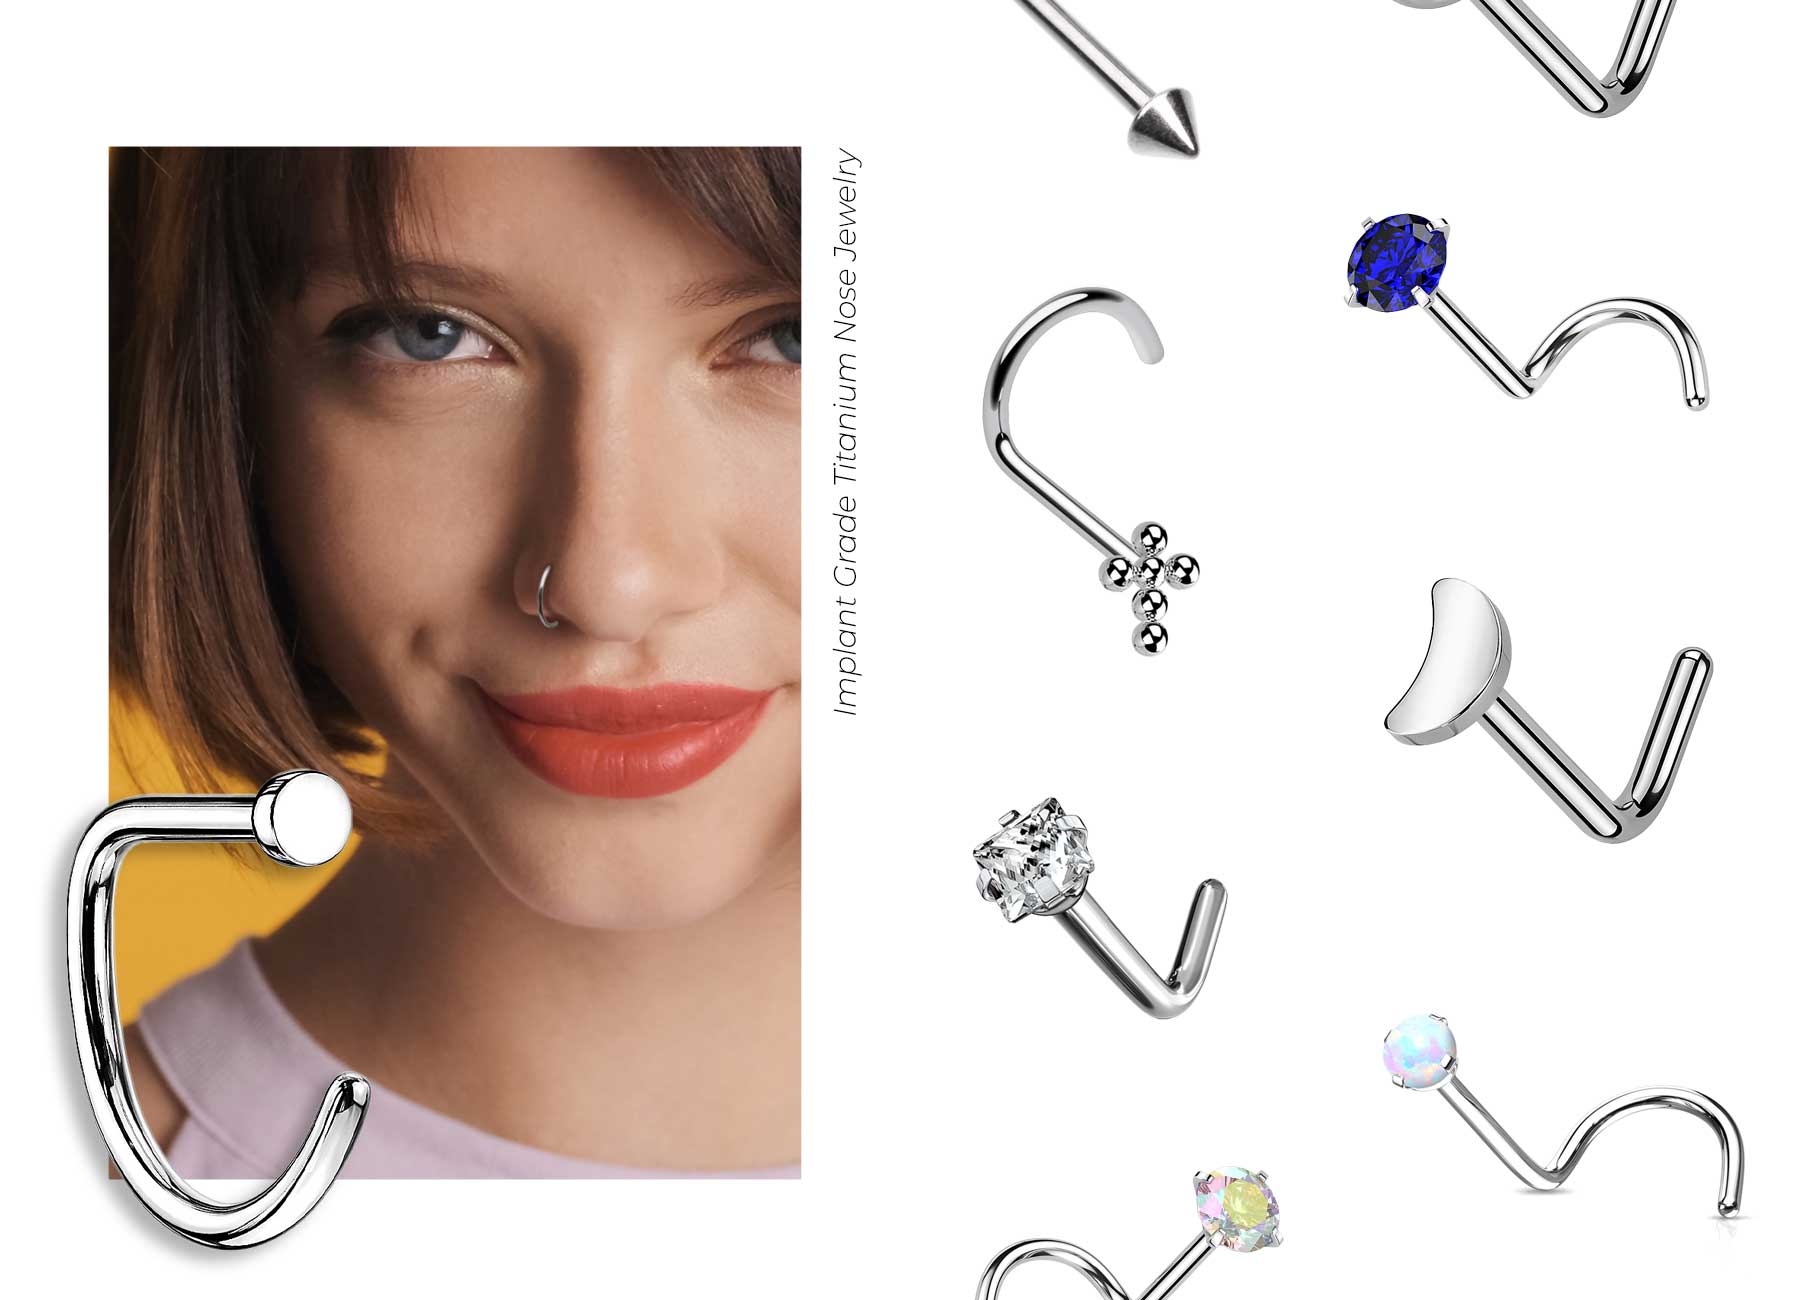 Young woman with a nose stud next to bm25.com's collection of curved end nose studs made in implant grade titanium